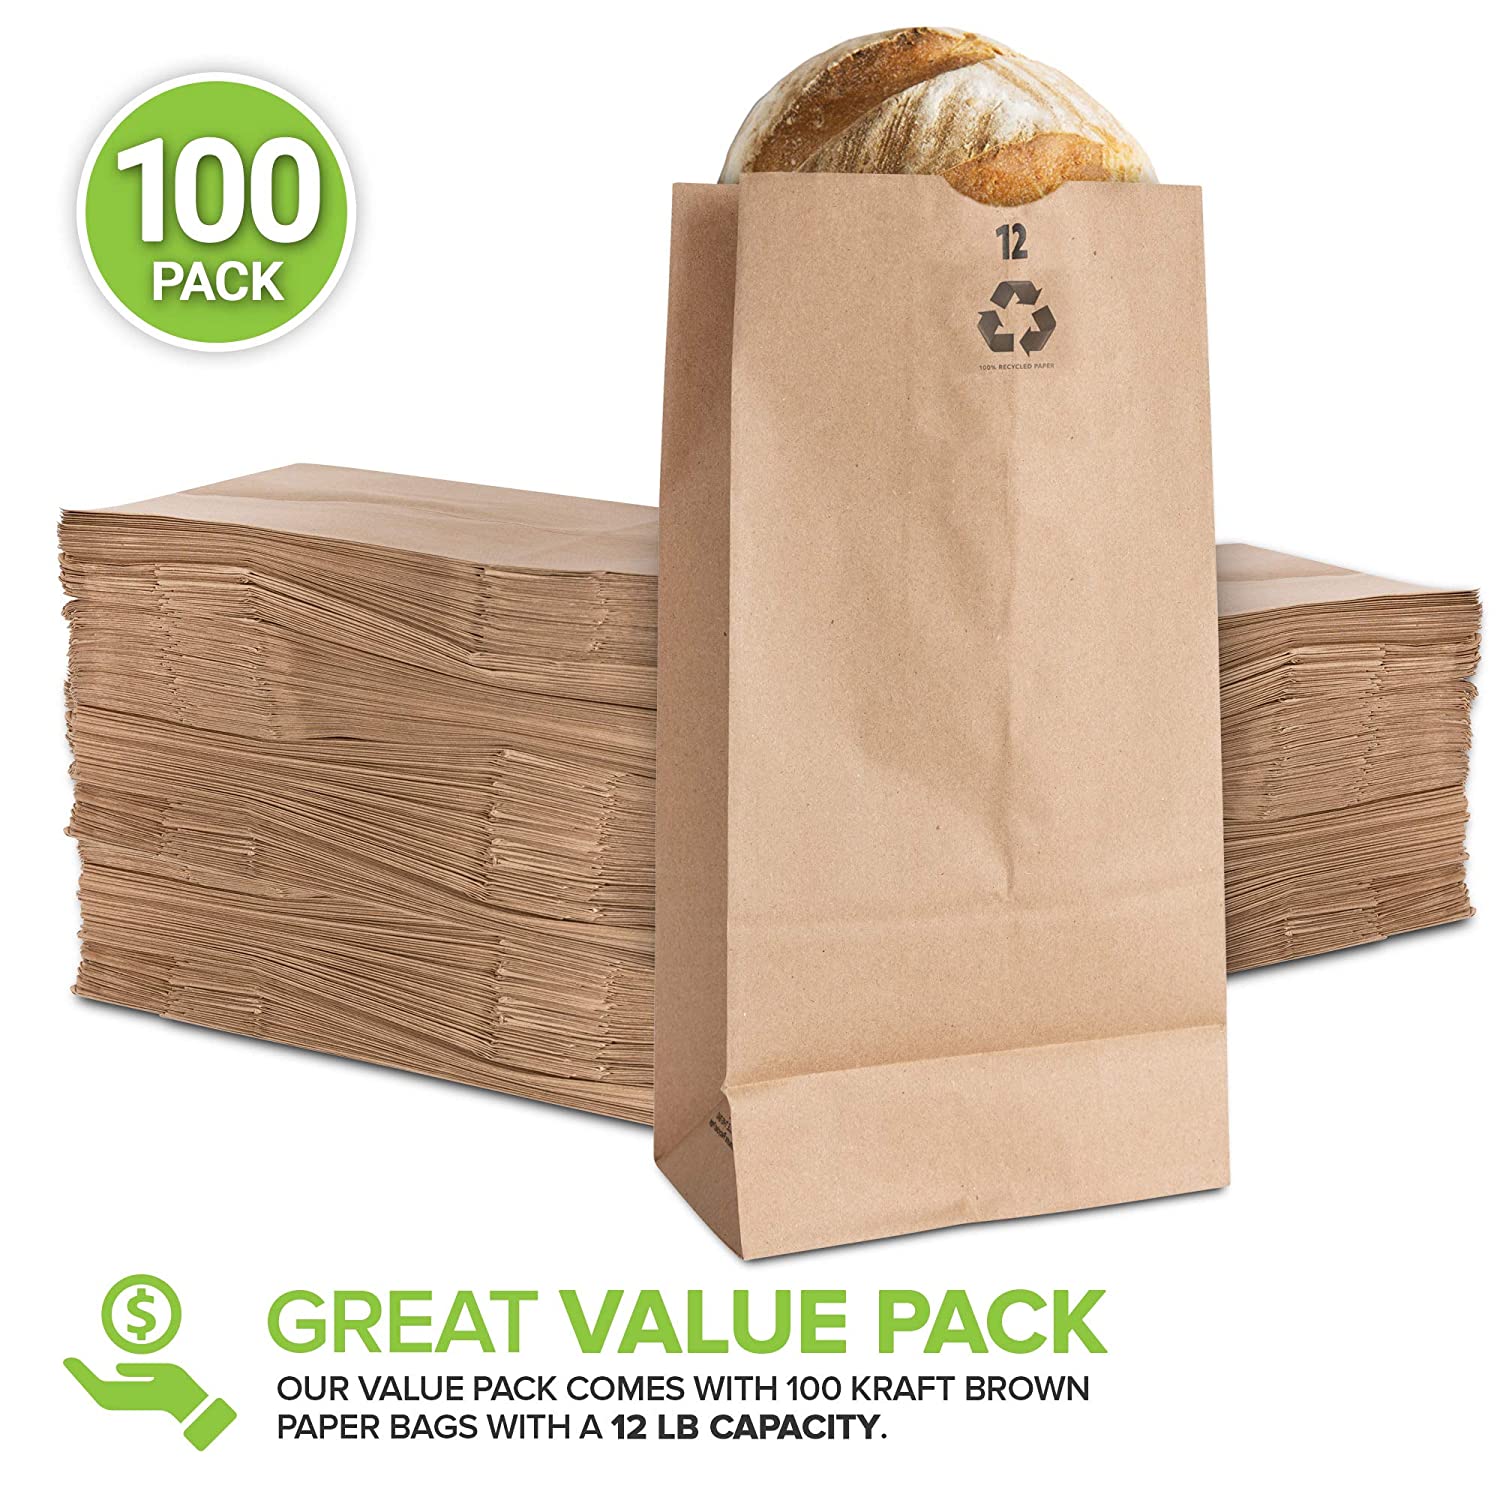 50 Count - White Paper Bags For Packing Lunch Snacks - Blank White Lunch  Bags Paper For Arts Crafts Projects